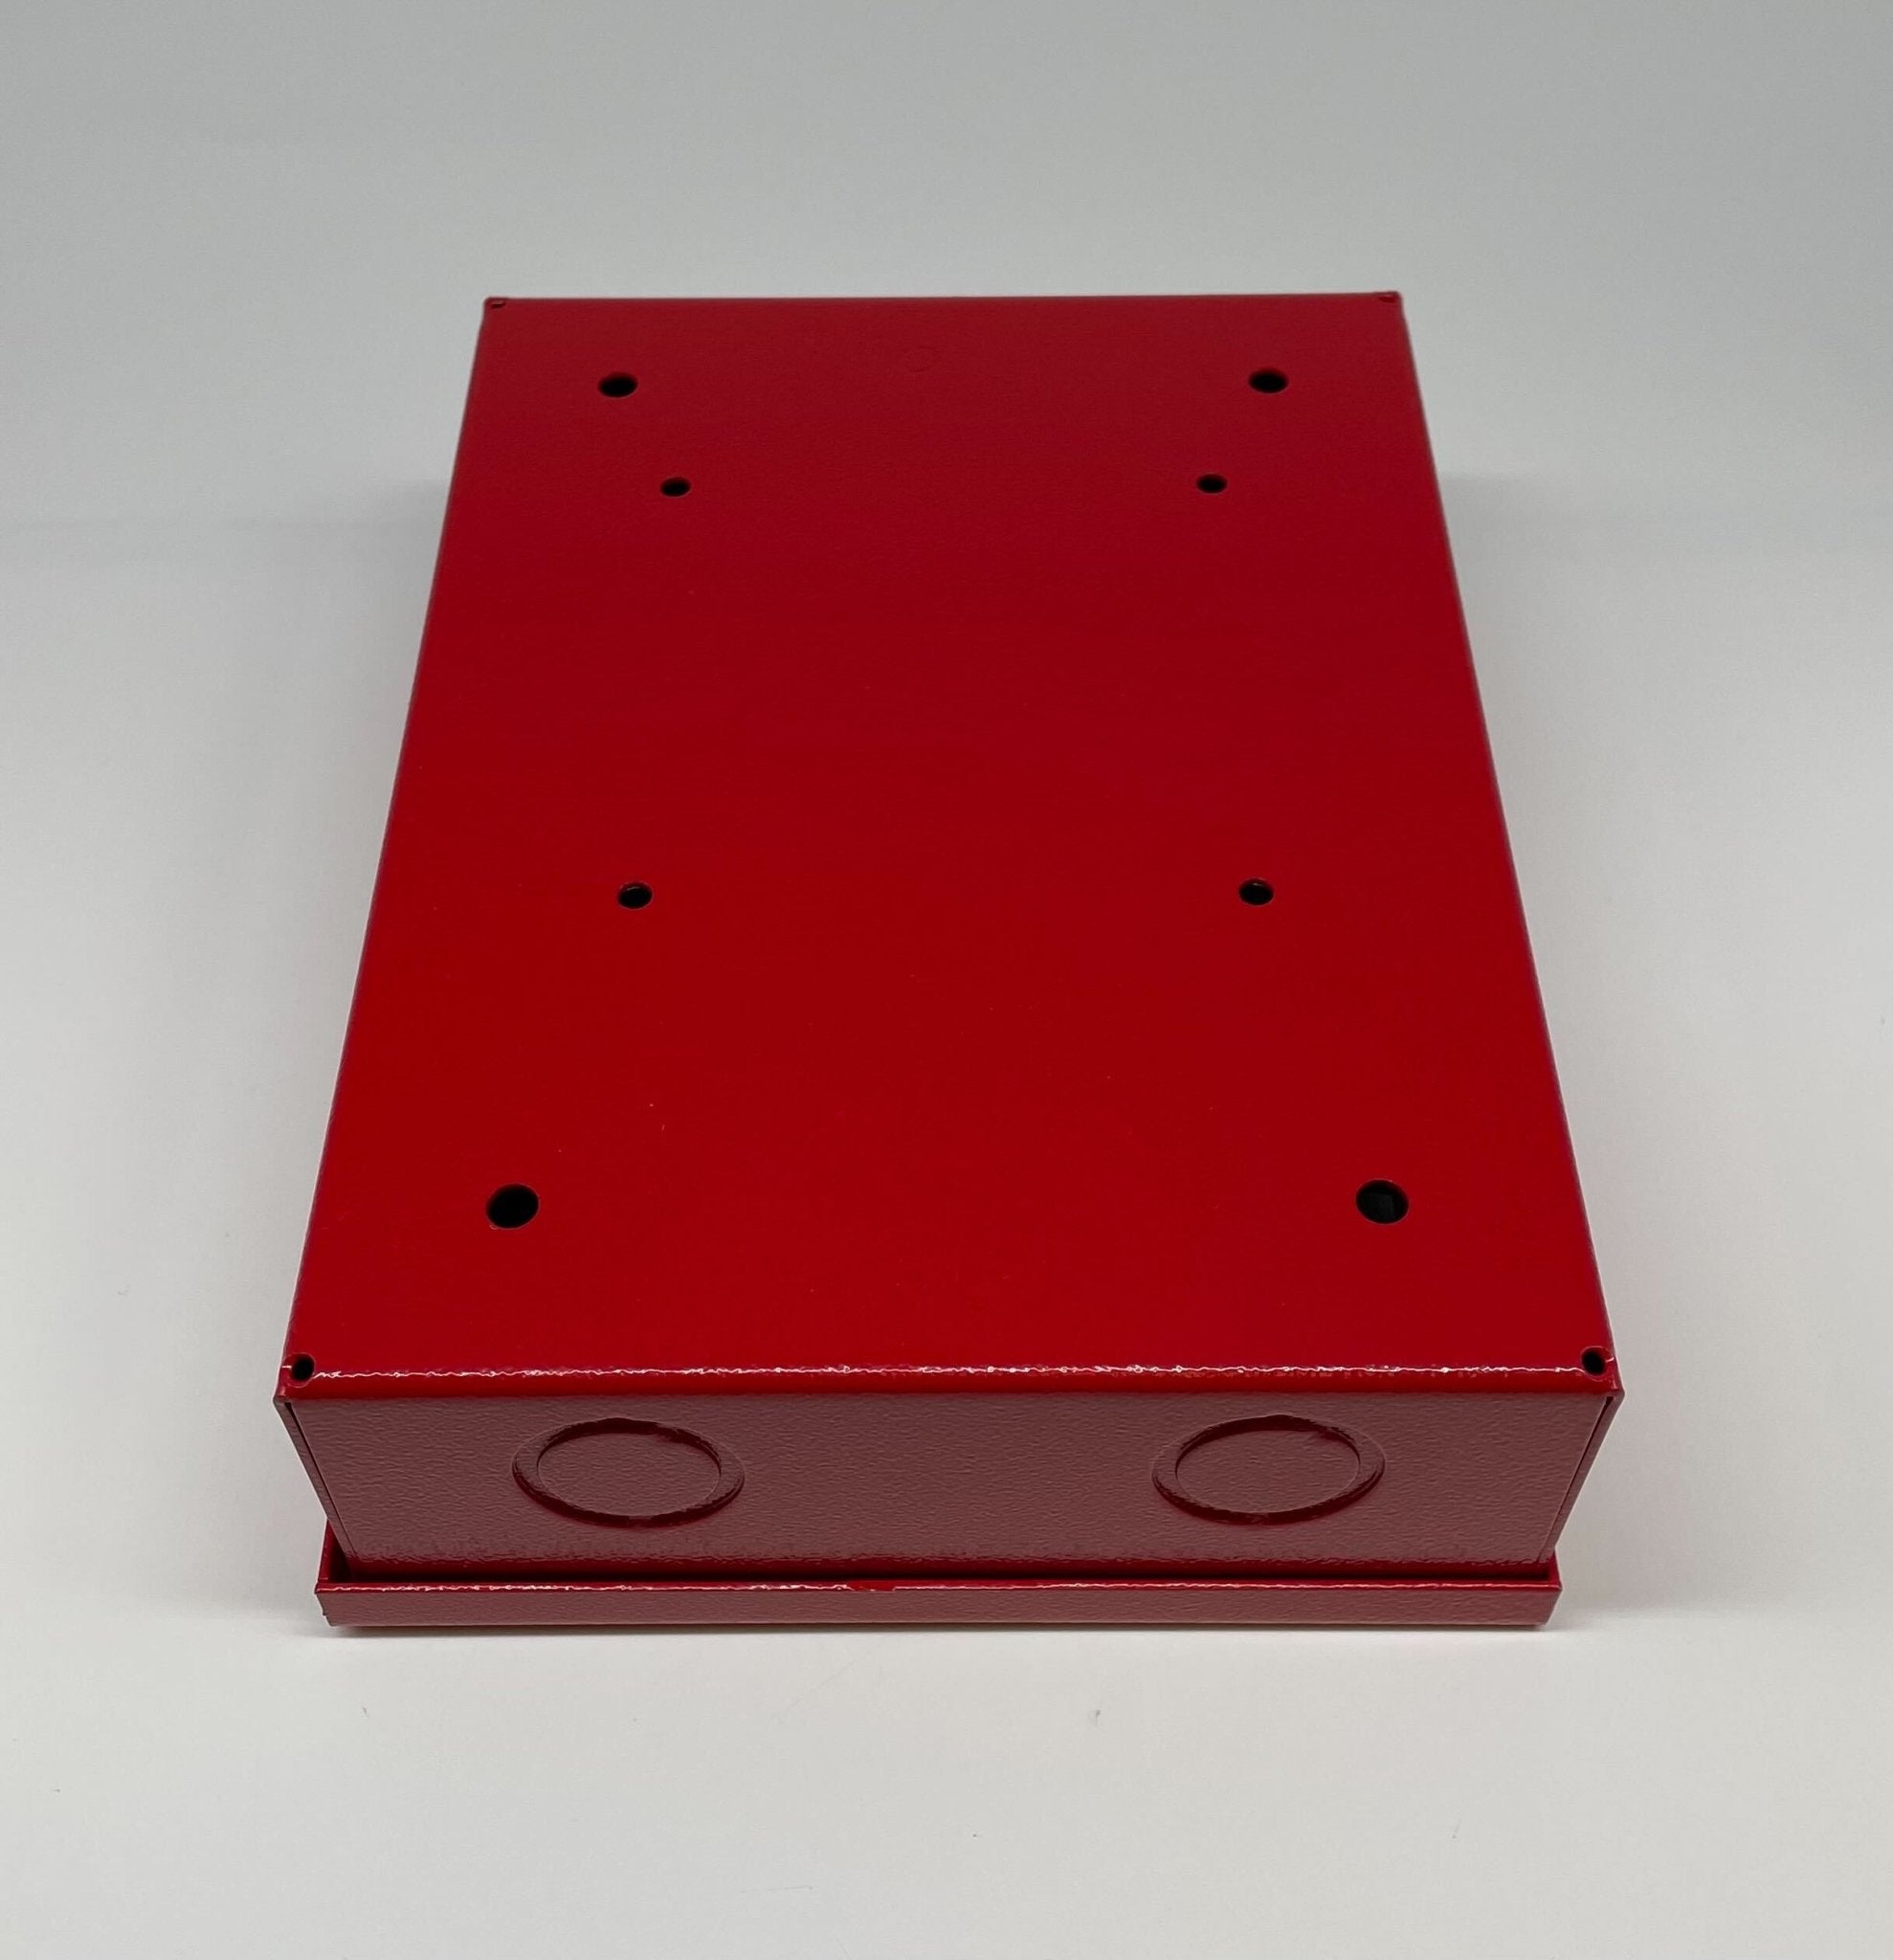 Space Age Electroncis SSU00636, IF1 16-Point Terminal Cabinet with Tool-Less Terminal Blocks - The Fire Alarm Supplier